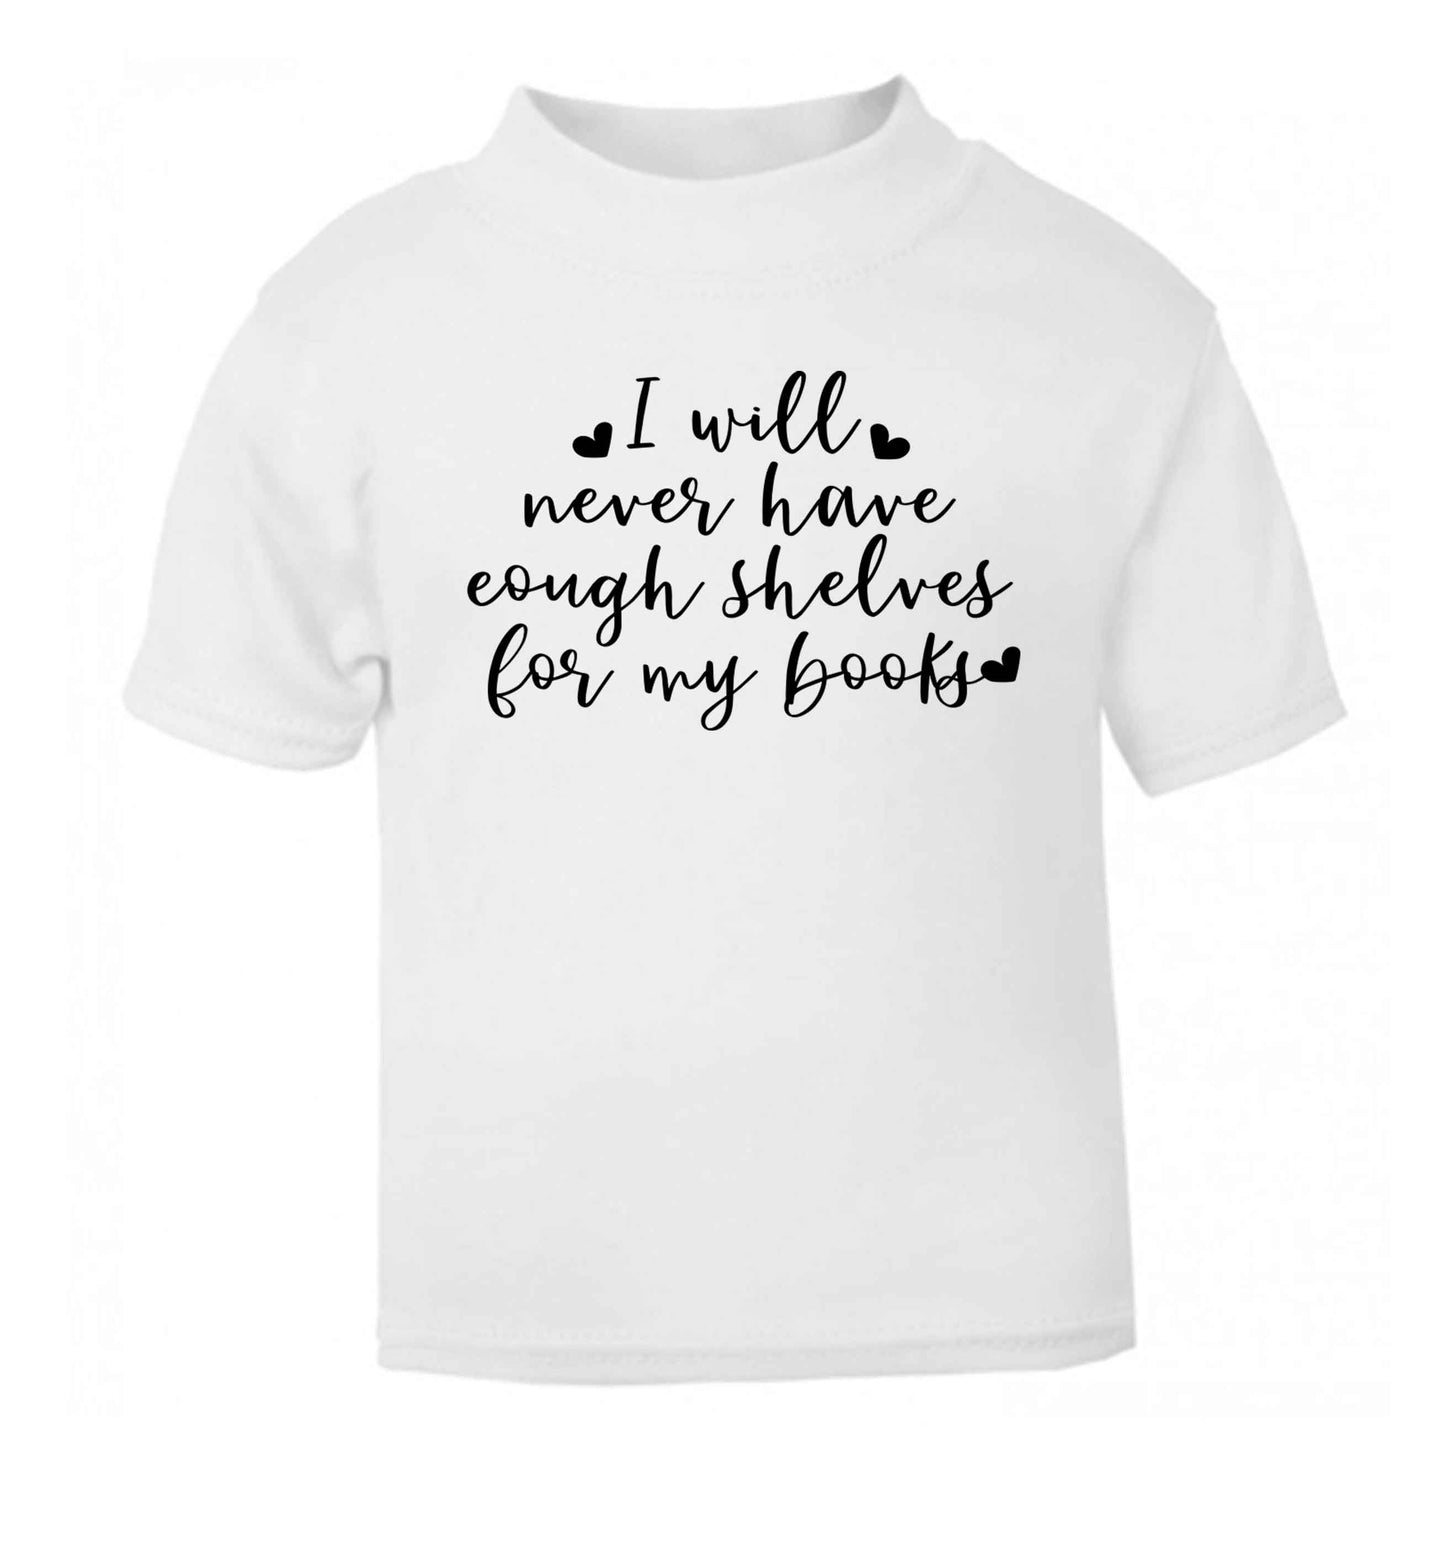 I will never have enough shelves for my books white Baby Toddler Tshirt 2 Years